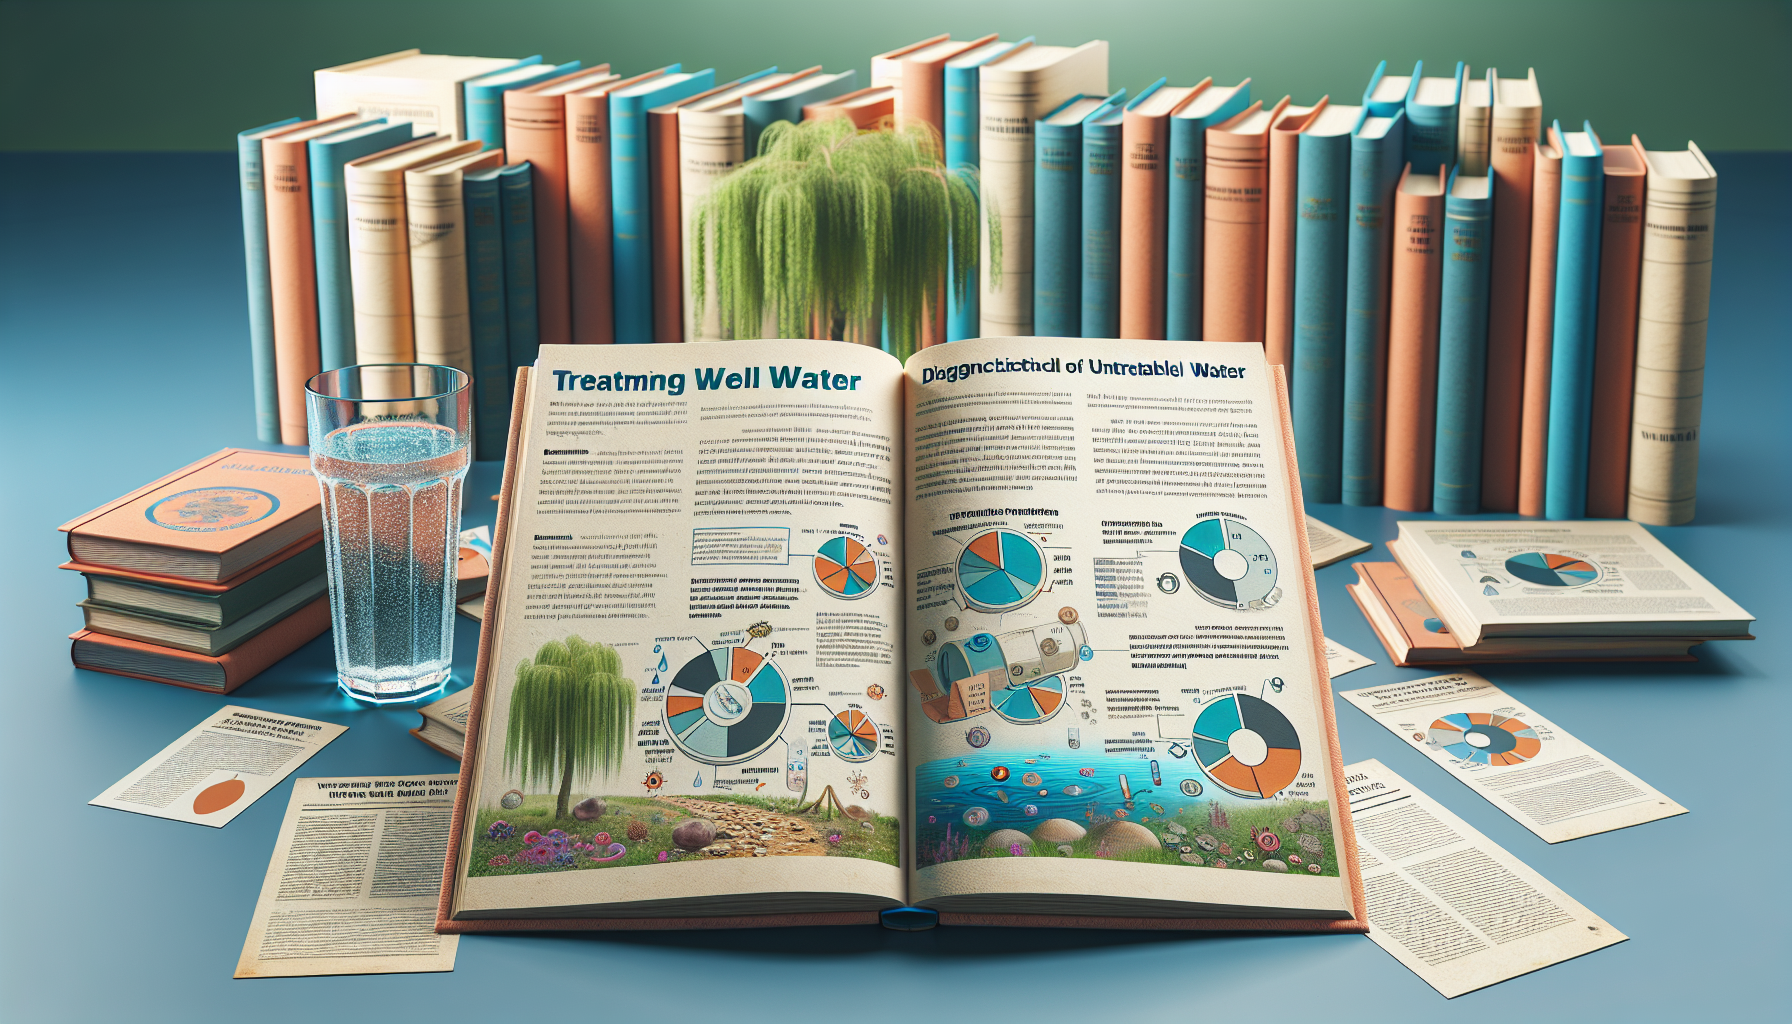 What Publications Provide Guidance On Well Water Treatment For Common Waterborne Pathogens?